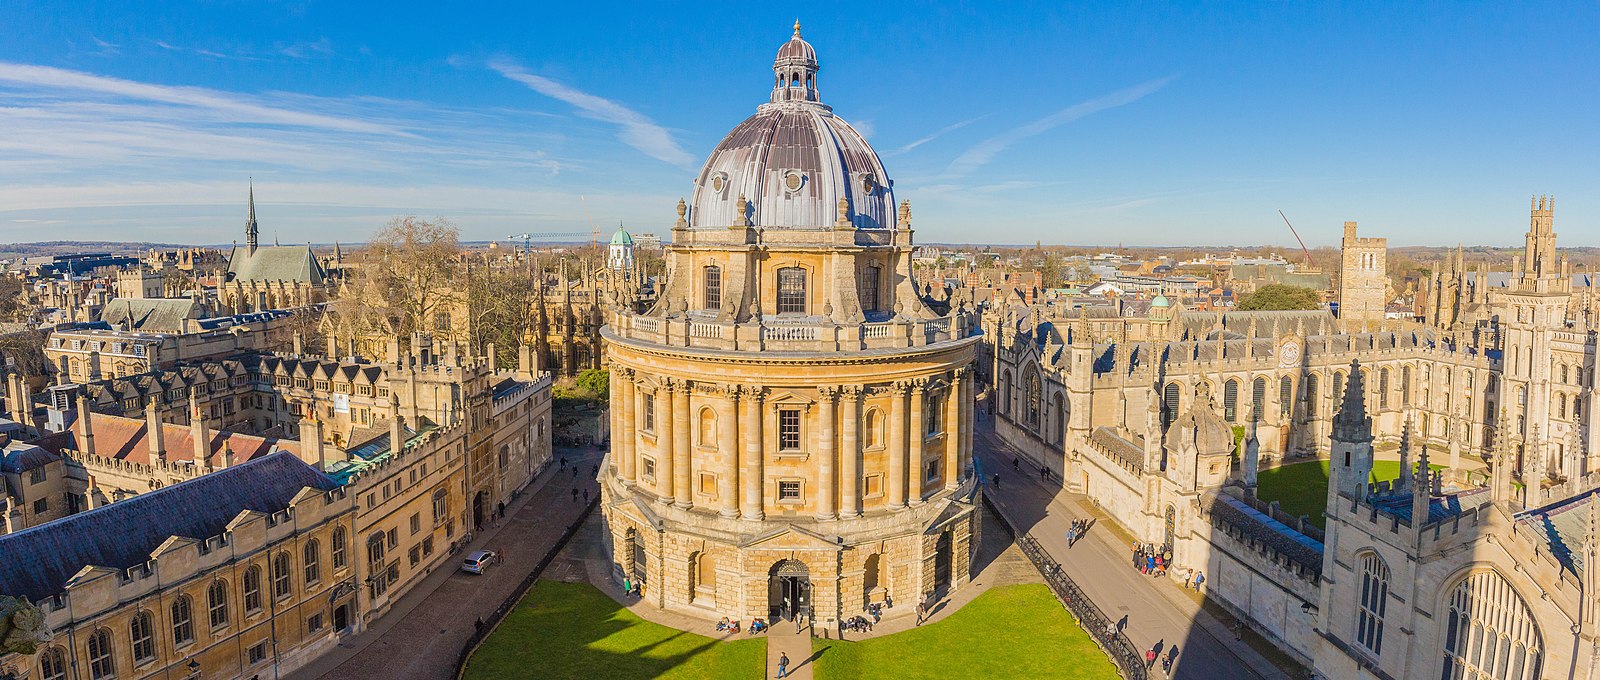 A Glimpse into Academic Excellence: The University of Oxford